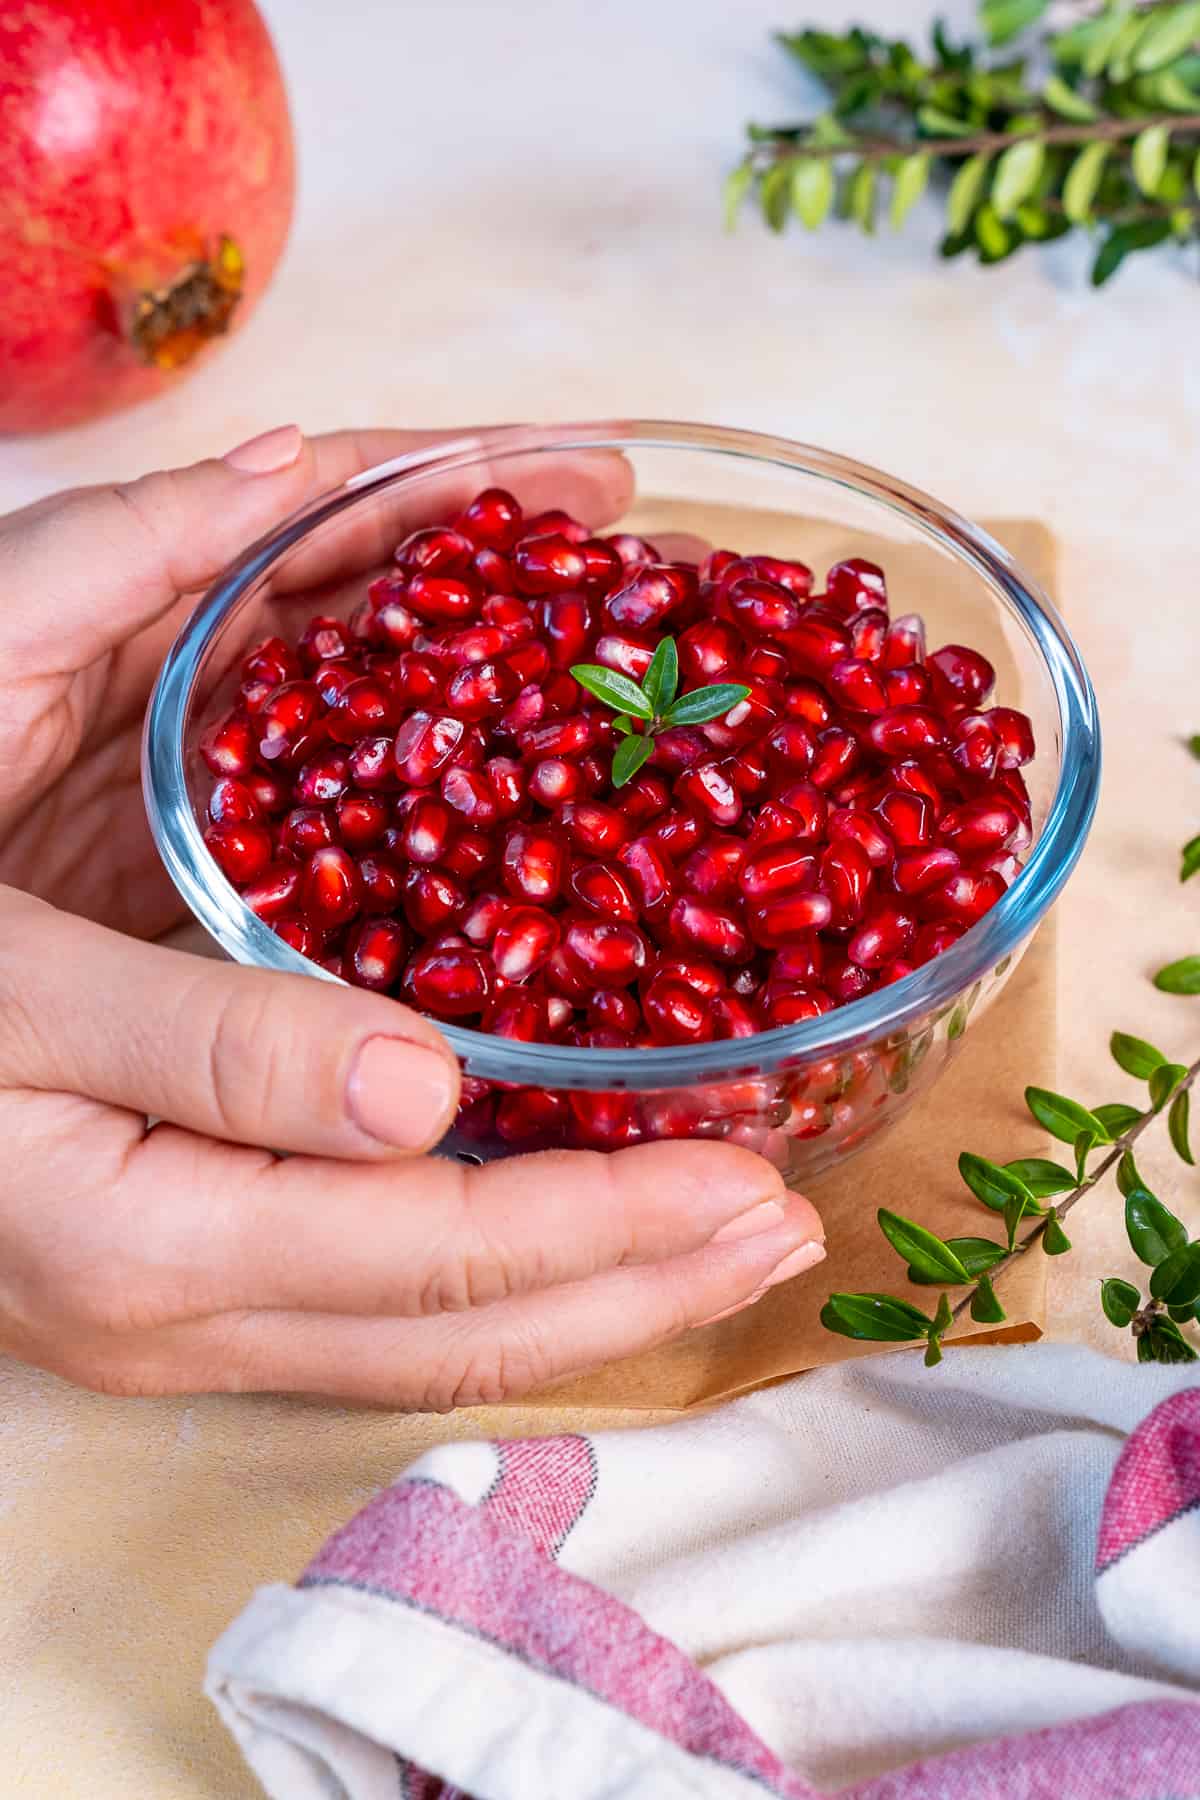 Hands holding a bowl of pomegranate seeds.